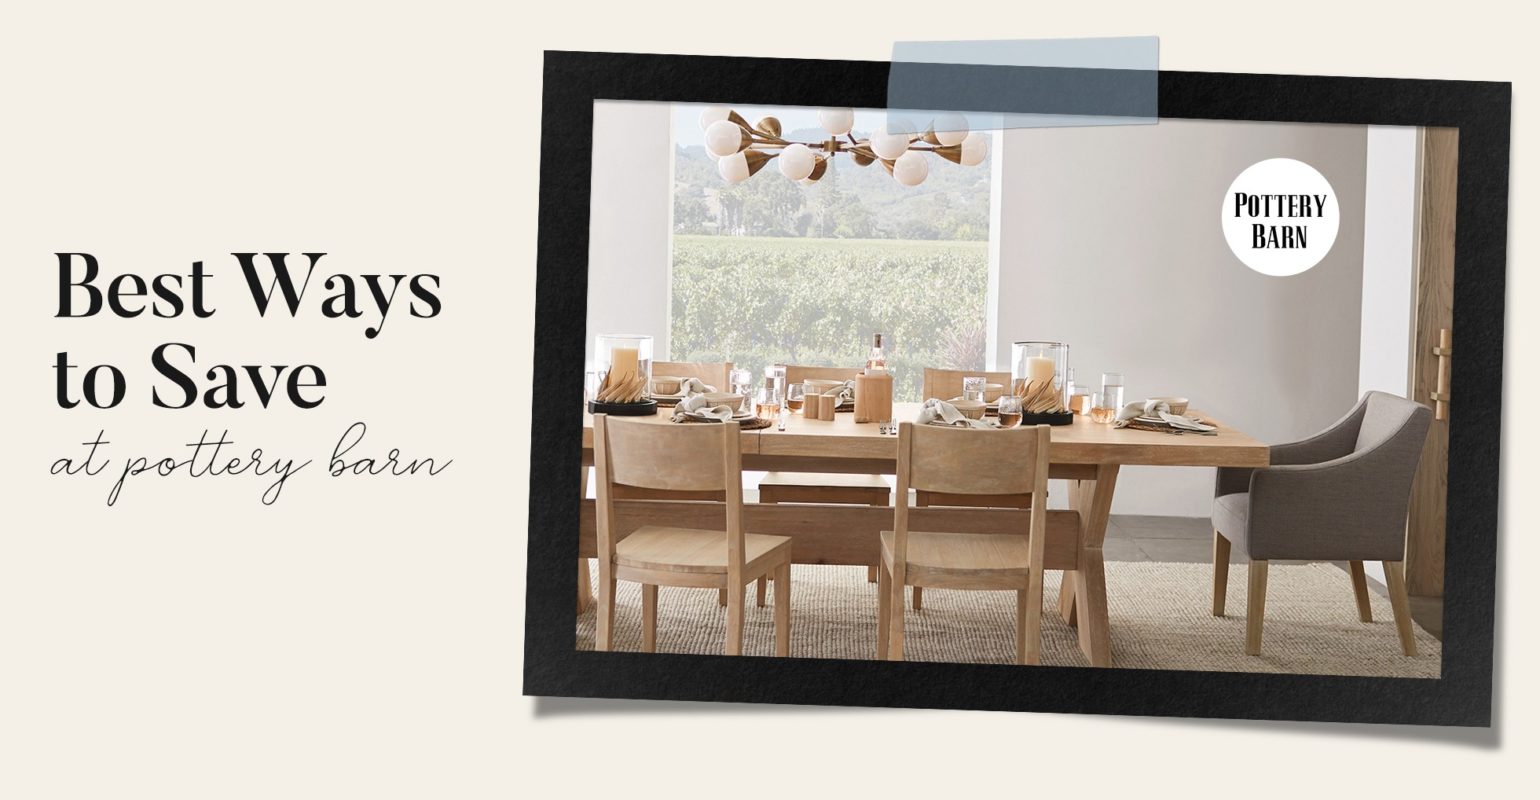 Best Ways to Save Money at Pottery Barn